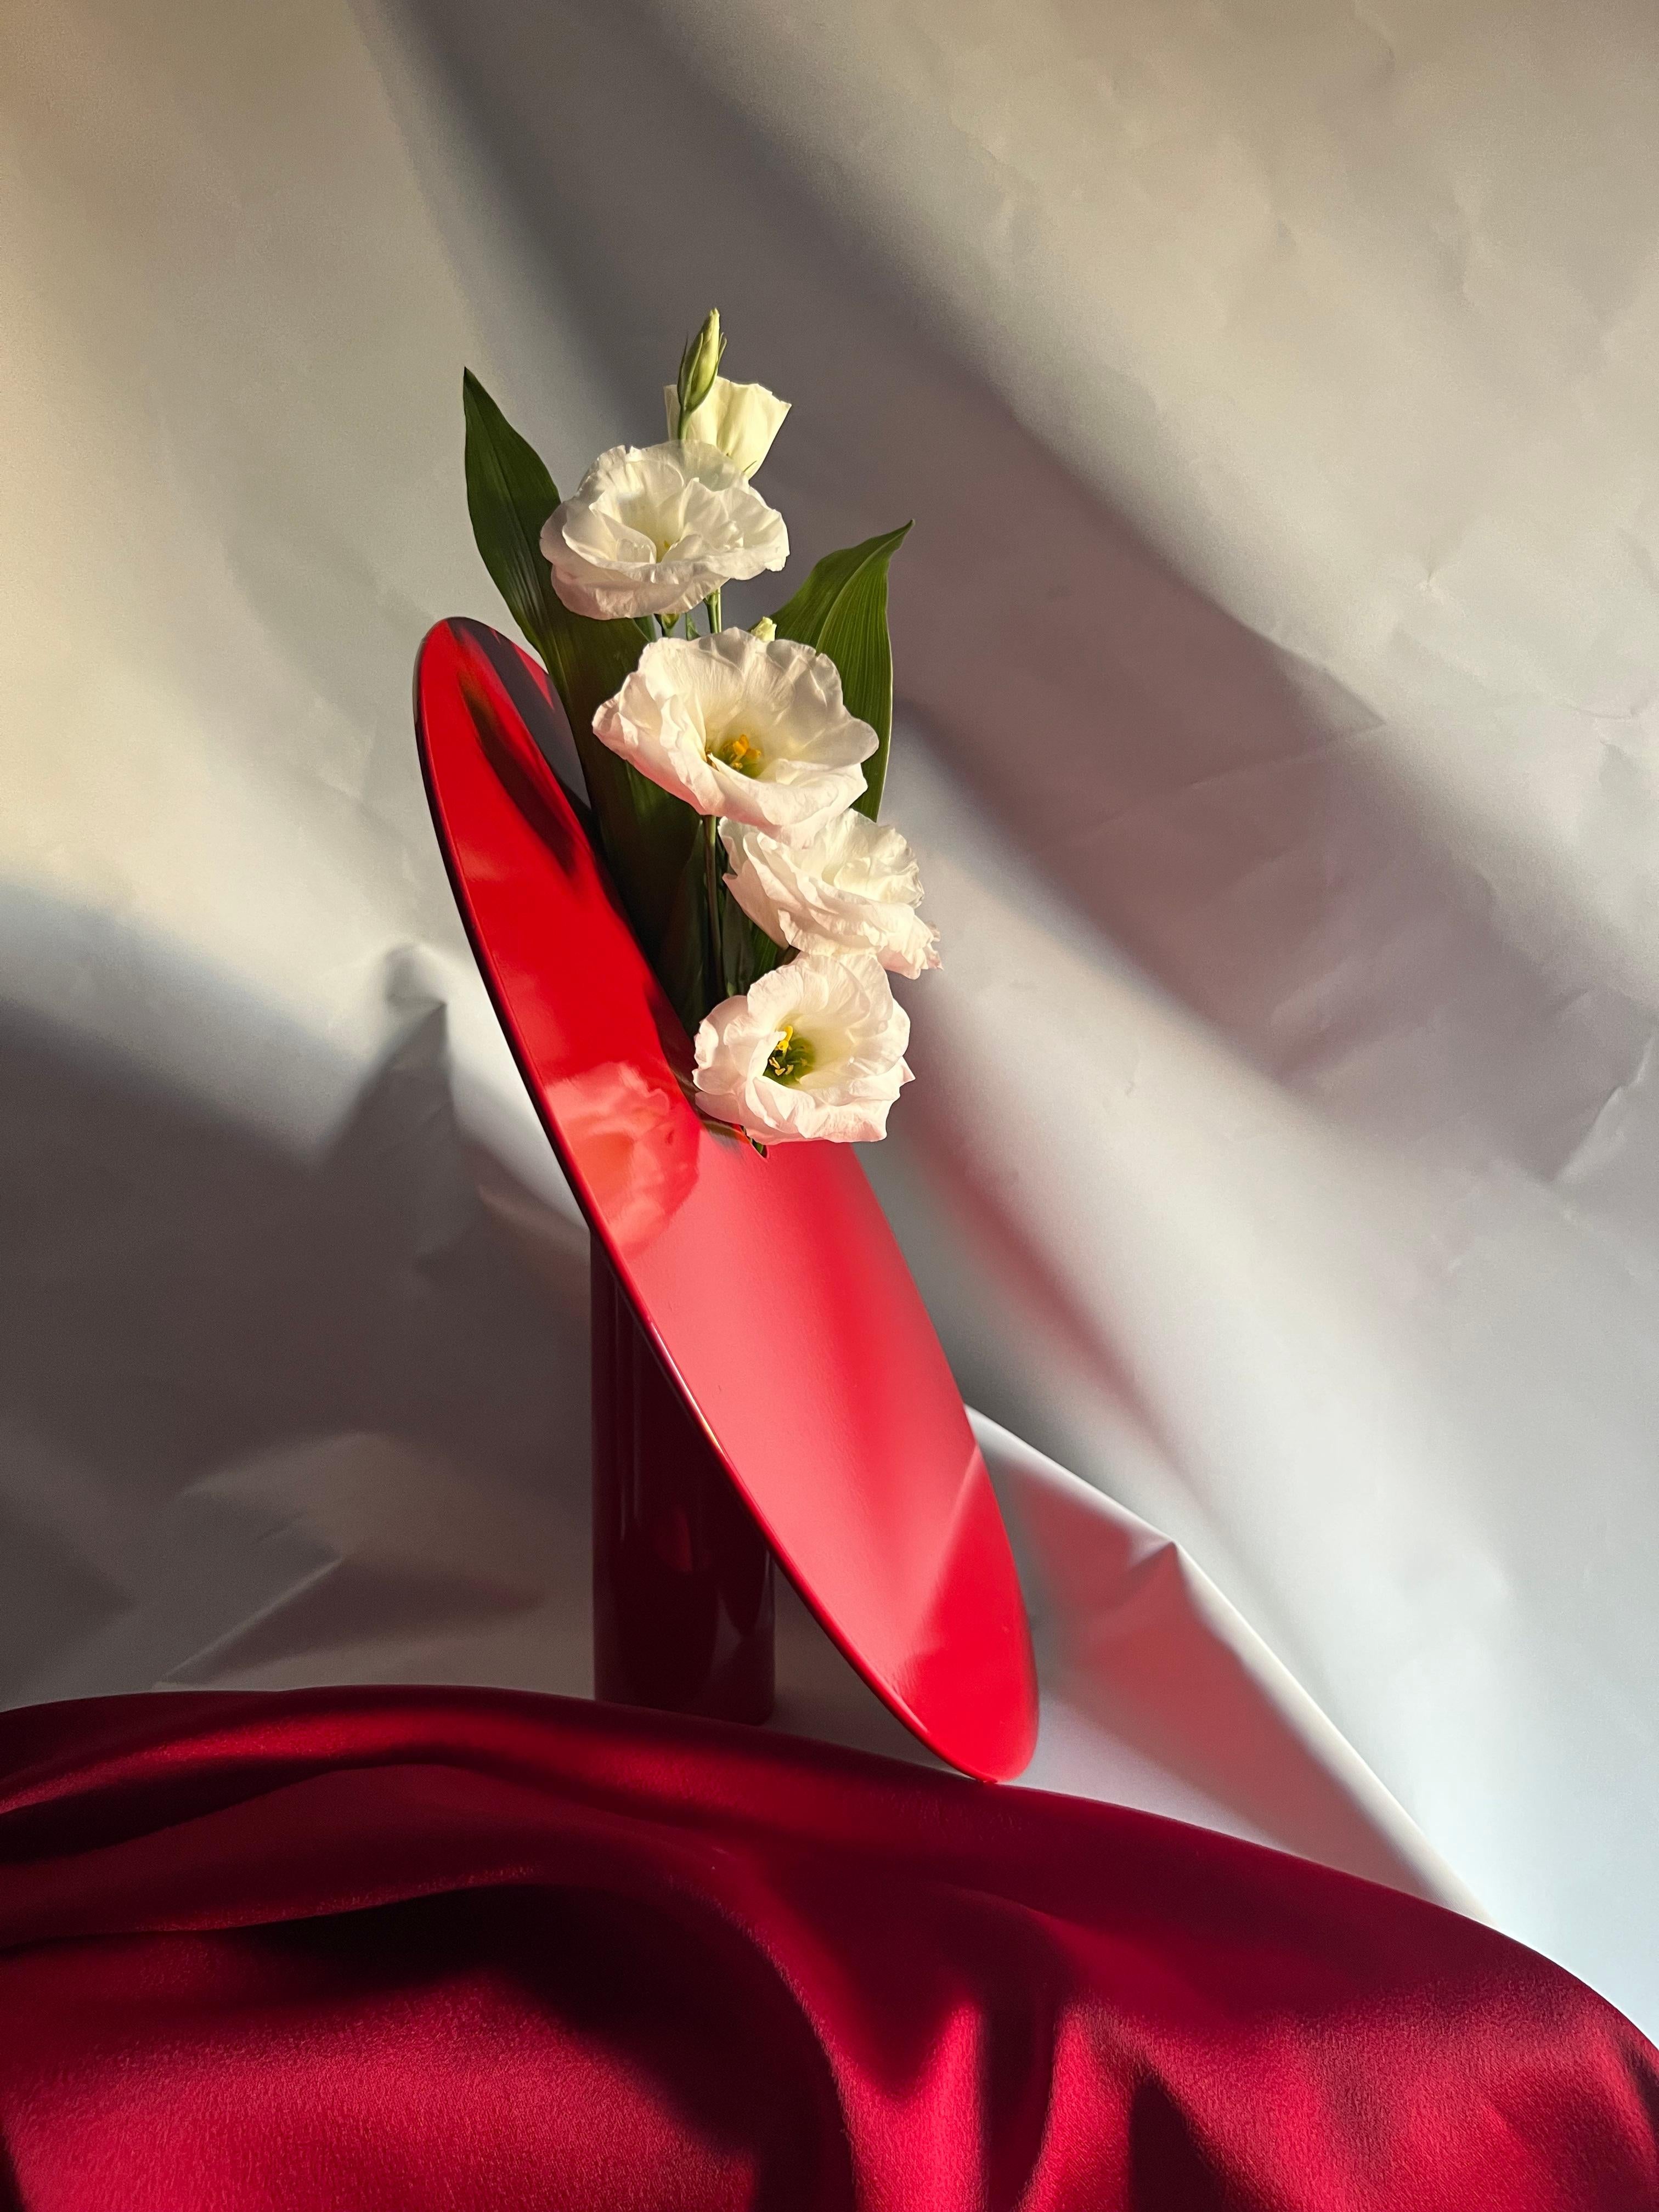 Hole red vase by Shou
Dimensions: D 40 x H 35 cm
Materials: Stainless steel and electrostatic coated steel
Colour: Red

'Hole' vase inspired by the obscurity of the universe and black holes. The circular shape represents the galaxy, the